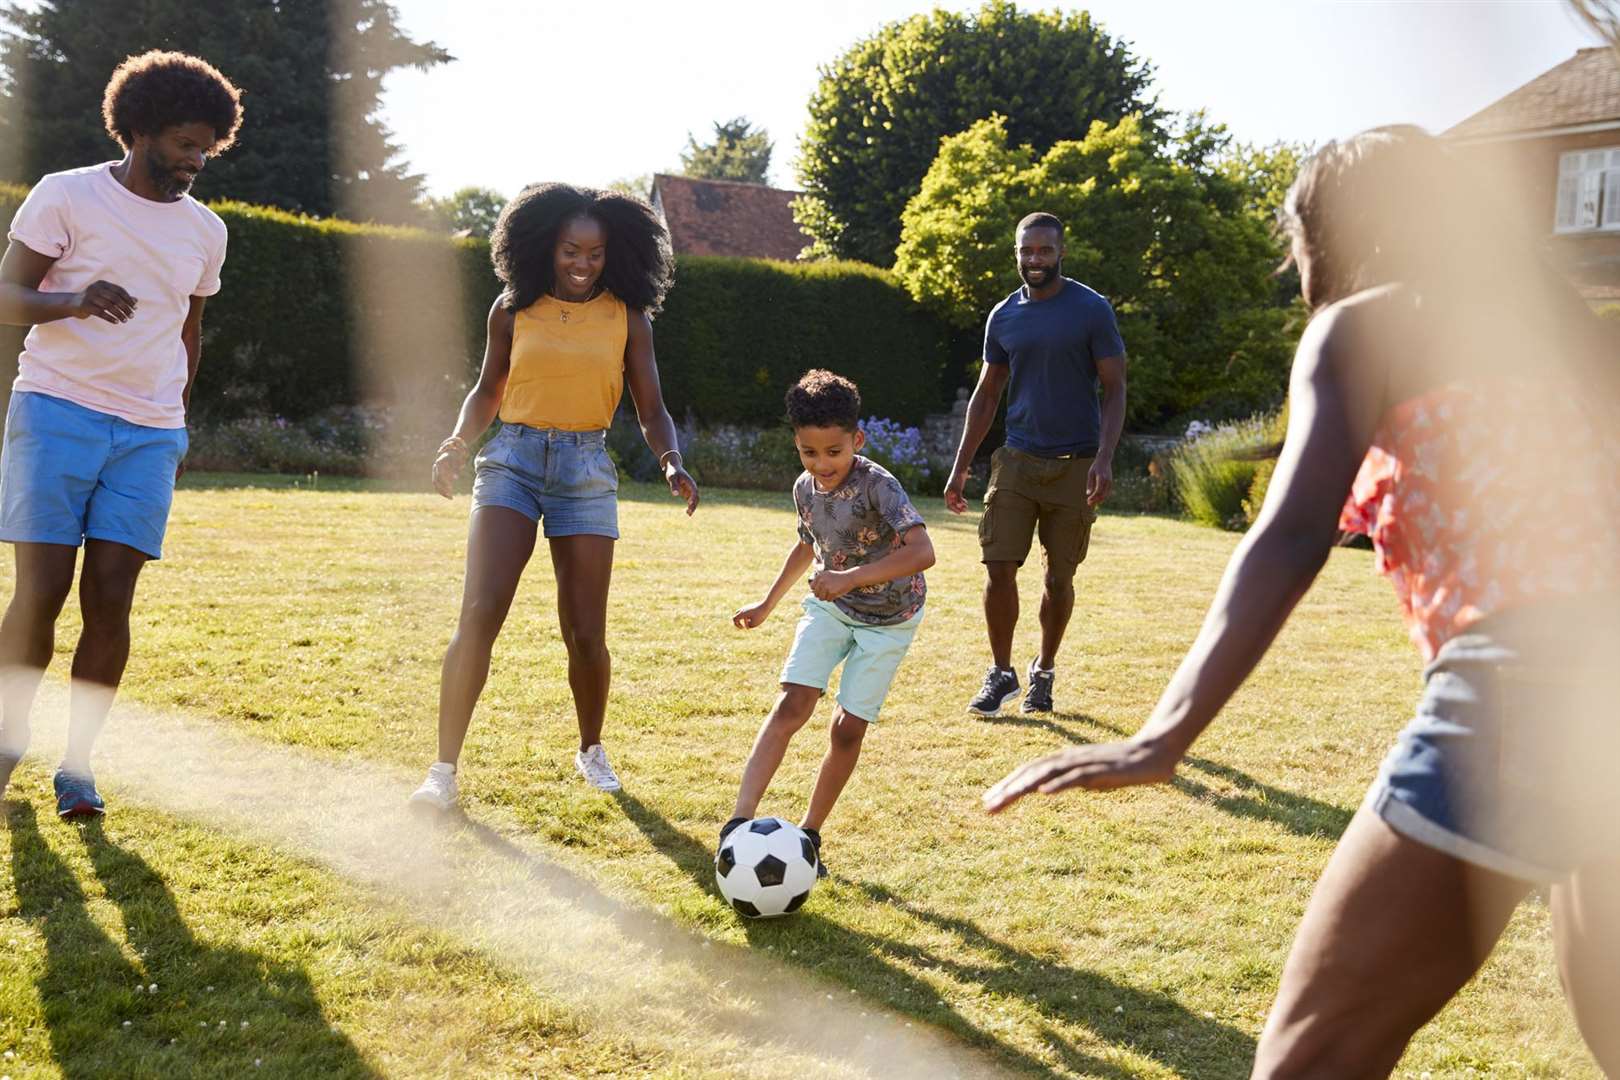 The NSPCC says families are keen to spend more time playing outside this summer after the pandemic